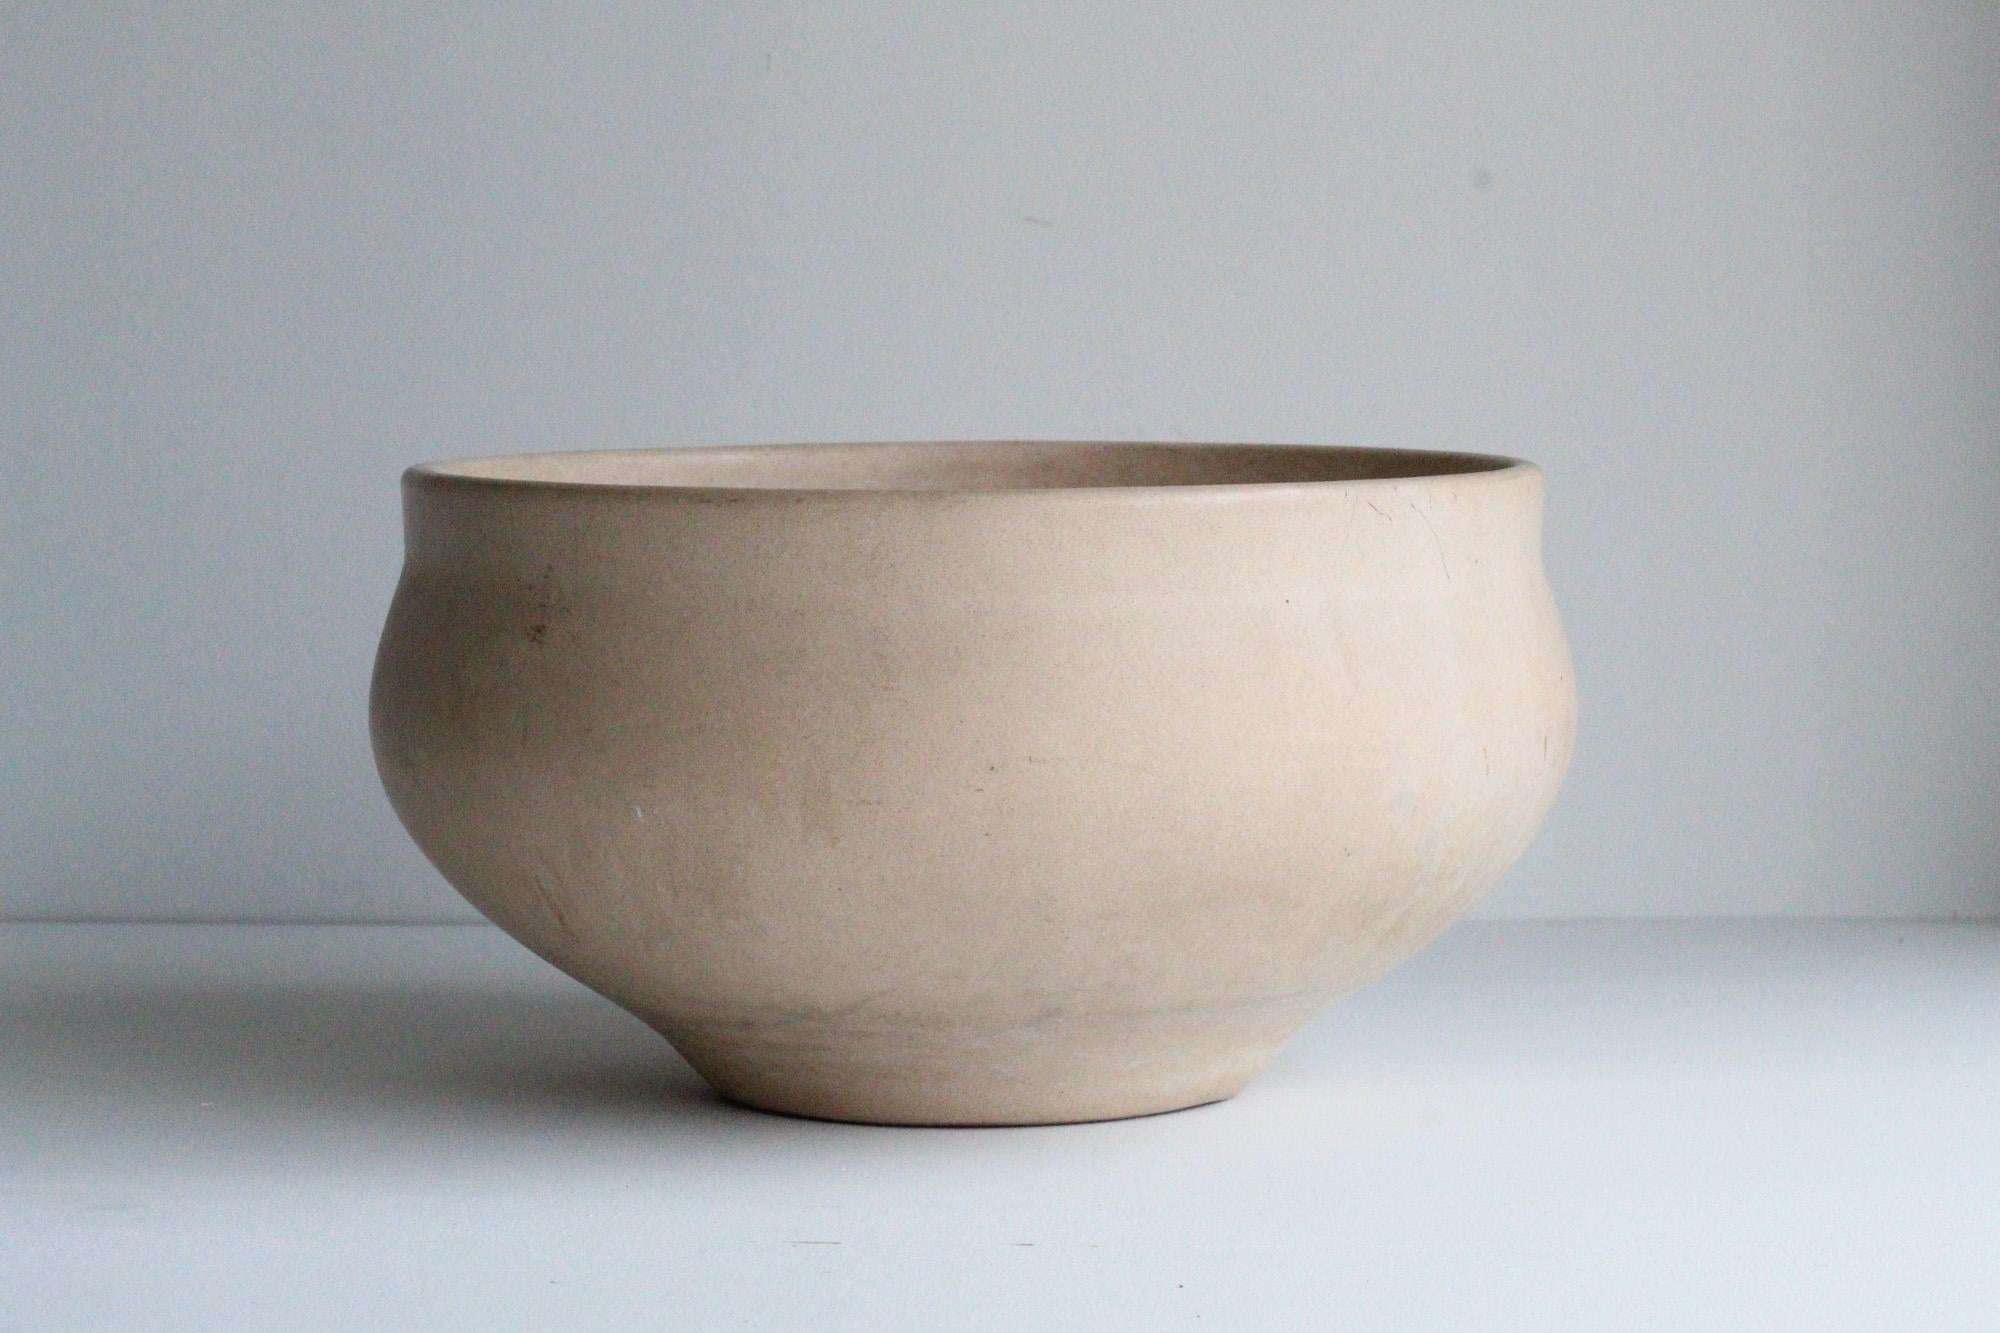 A Mid-Century Modern ceramic bowl planter from David Cressey's Pro/Artisan collection for Architectural Pottery. The stoneware planter has an off-white neutral tone, with slightly bowed sides. David Cressey planter has a single drainage hole in the